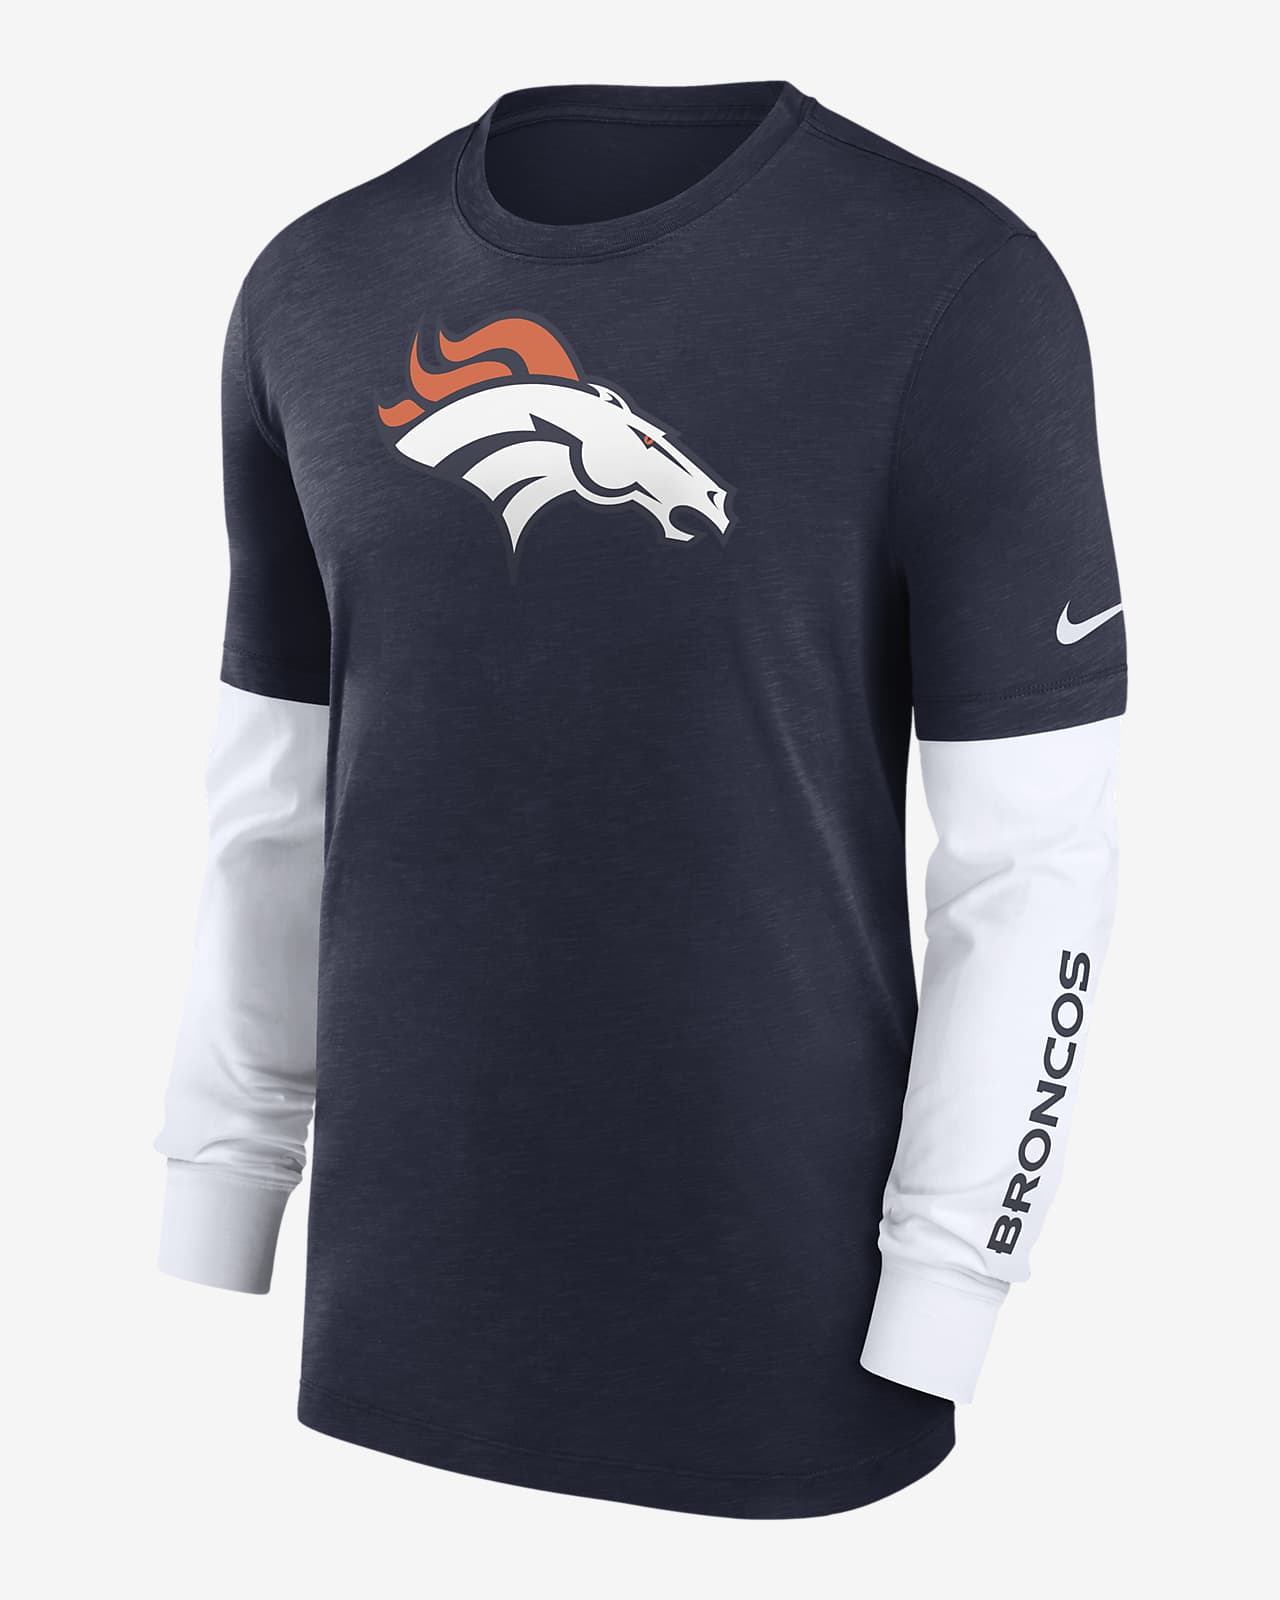 Denver Broncos Nike Men's NFL Long-Sleeve Top in Blue, Size: Small | 00BYEF518W-05G